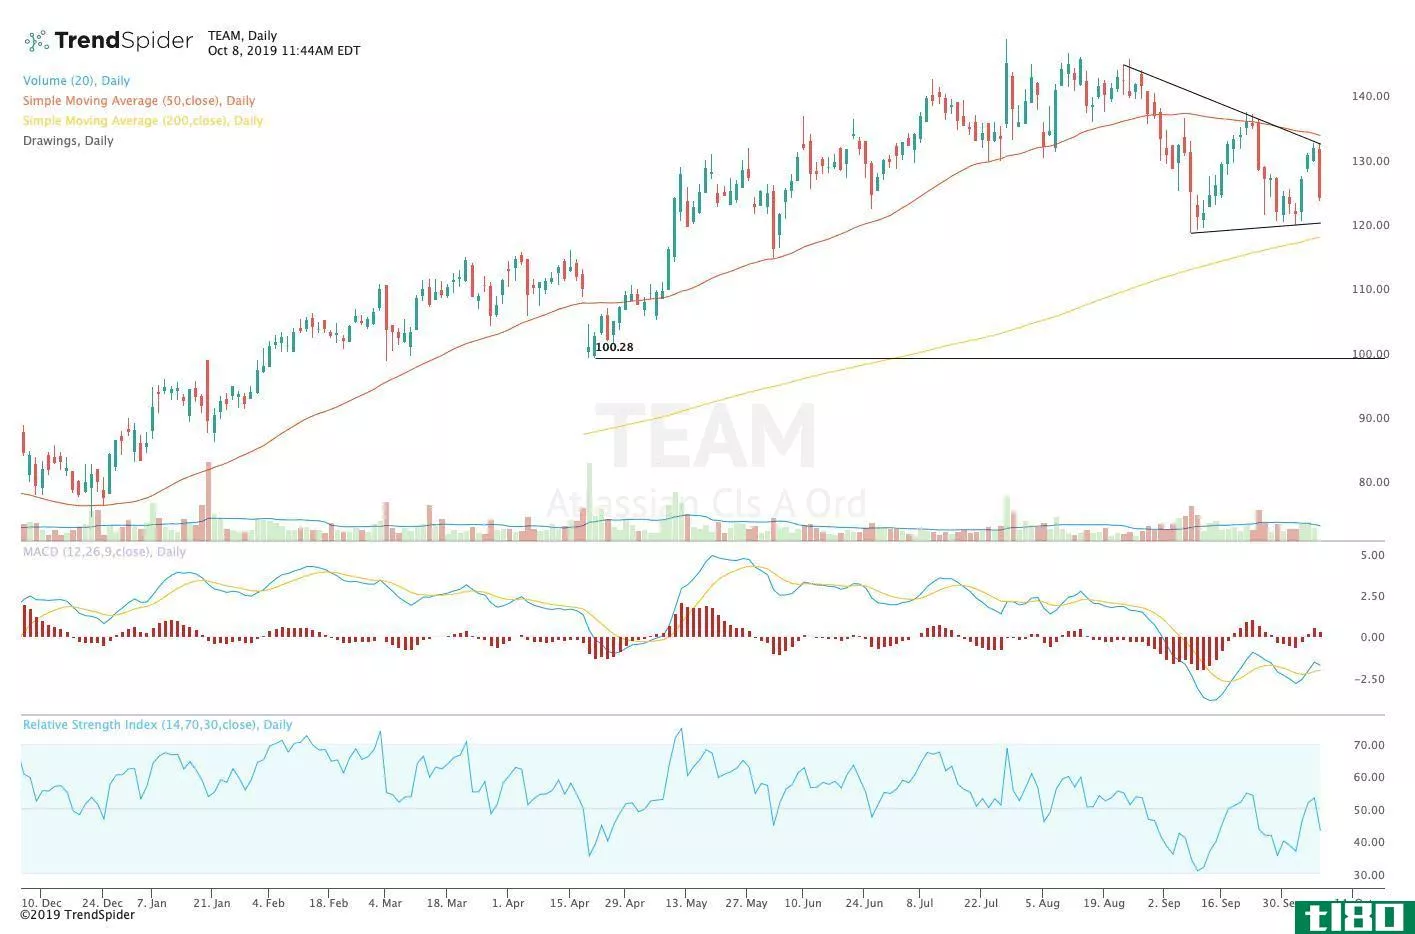 Chart showing the share price performance of Atlassian Corporation Plc (TEAM)